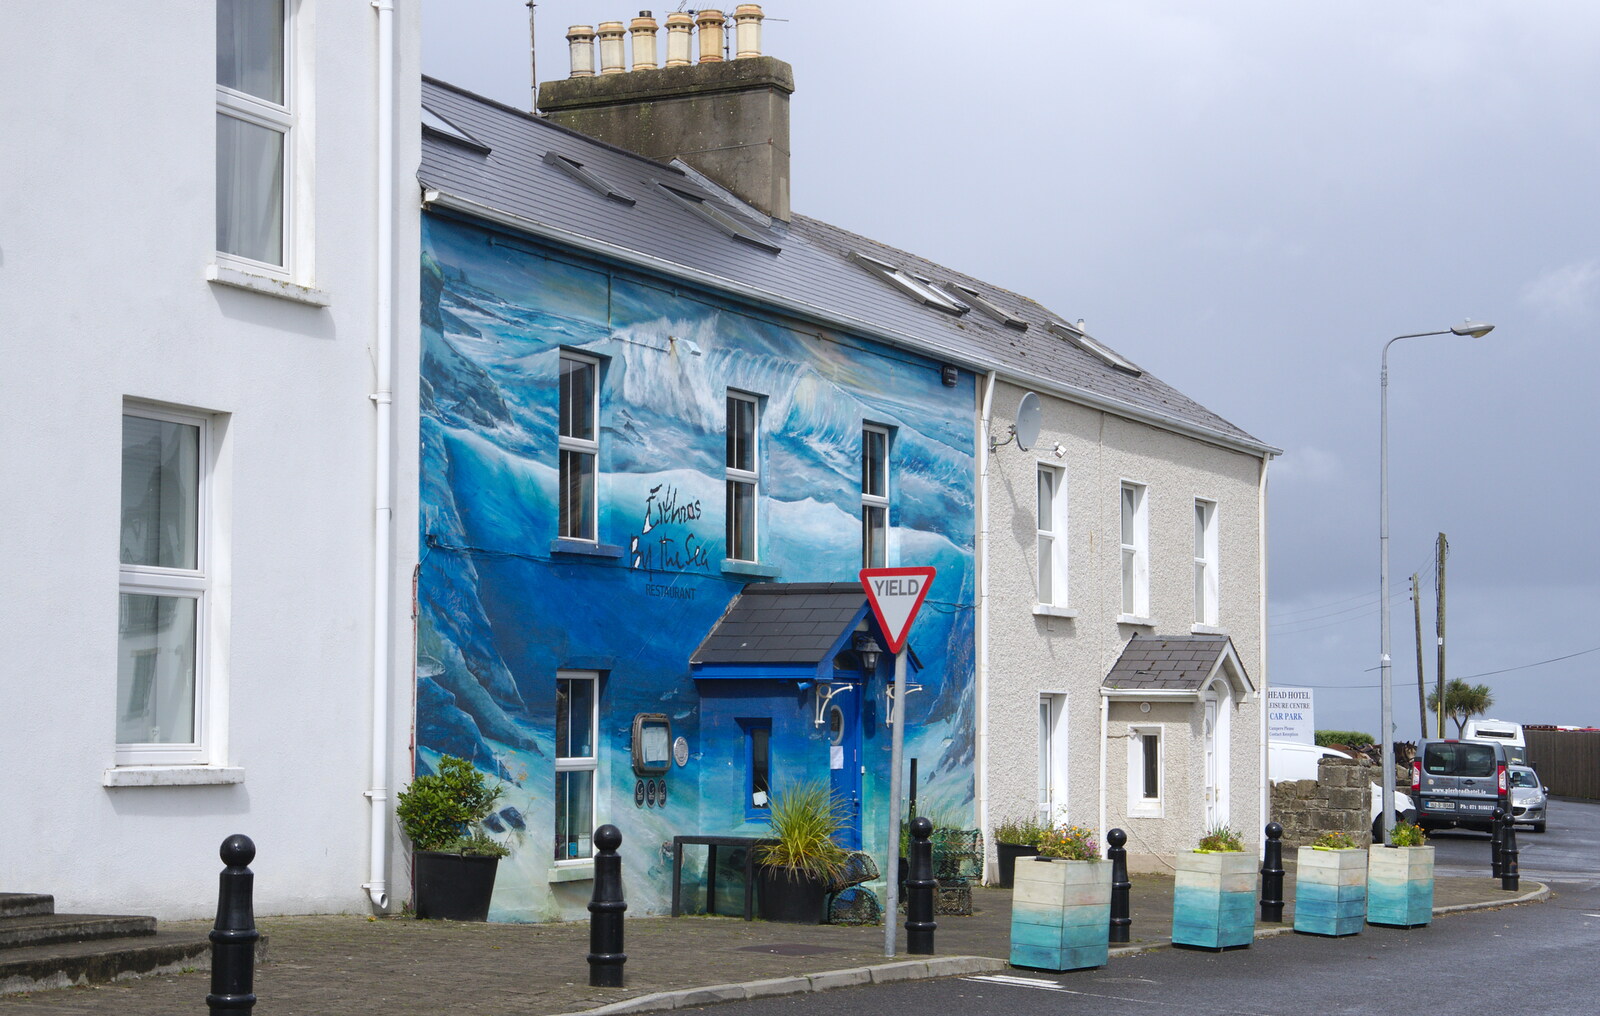 A house painted to look like the sea from Mullaghmore Beach and Marble Arch Caves, Sligo and Fermanagh, Ireland - 19th August 2019